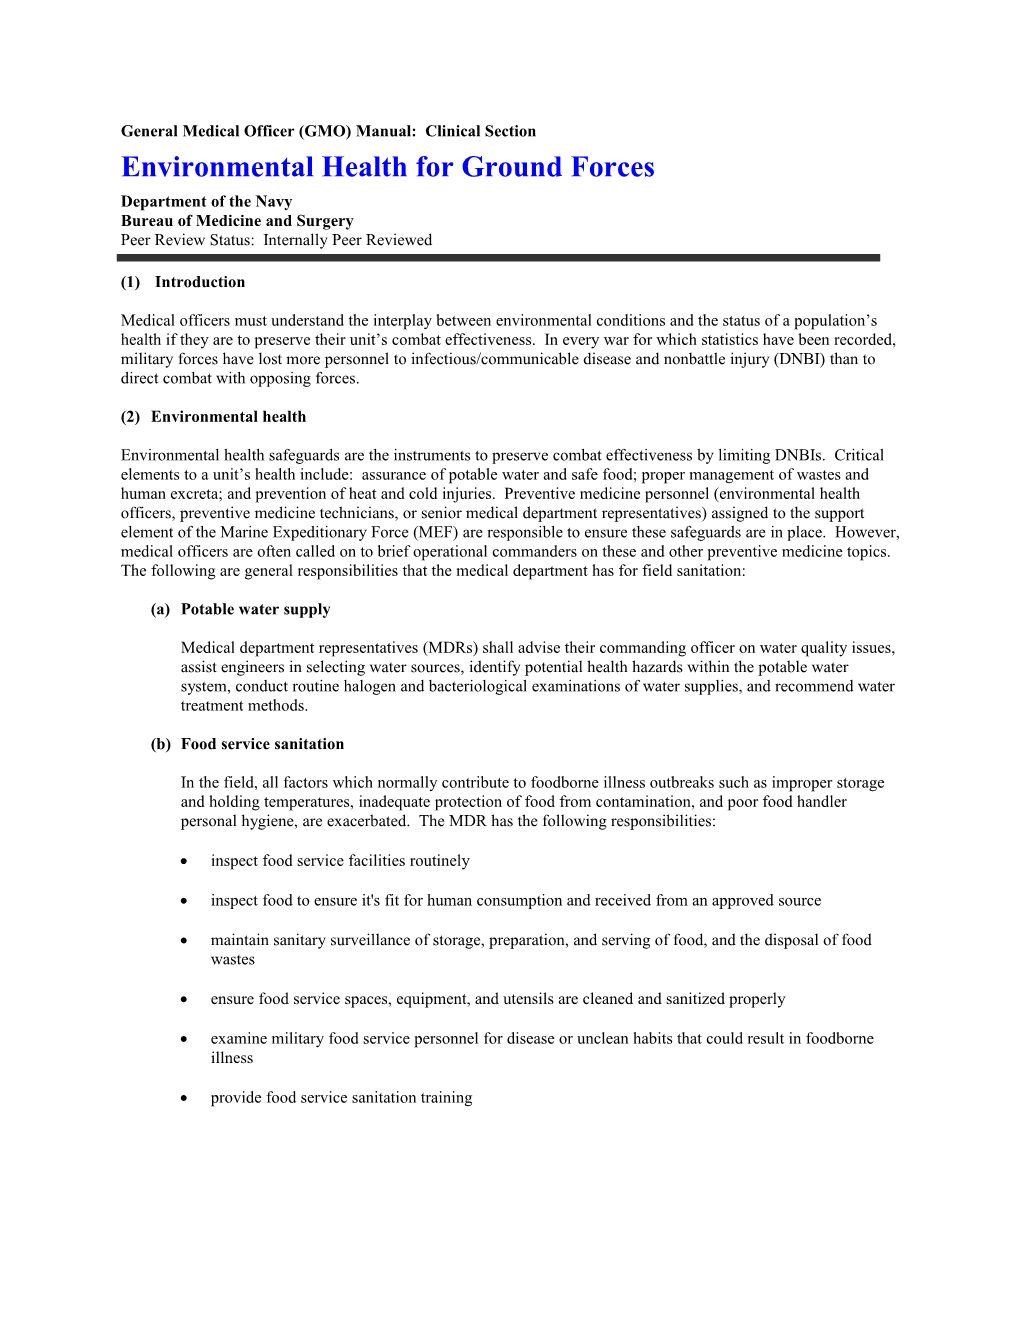 Environmental Health for Ground Forces